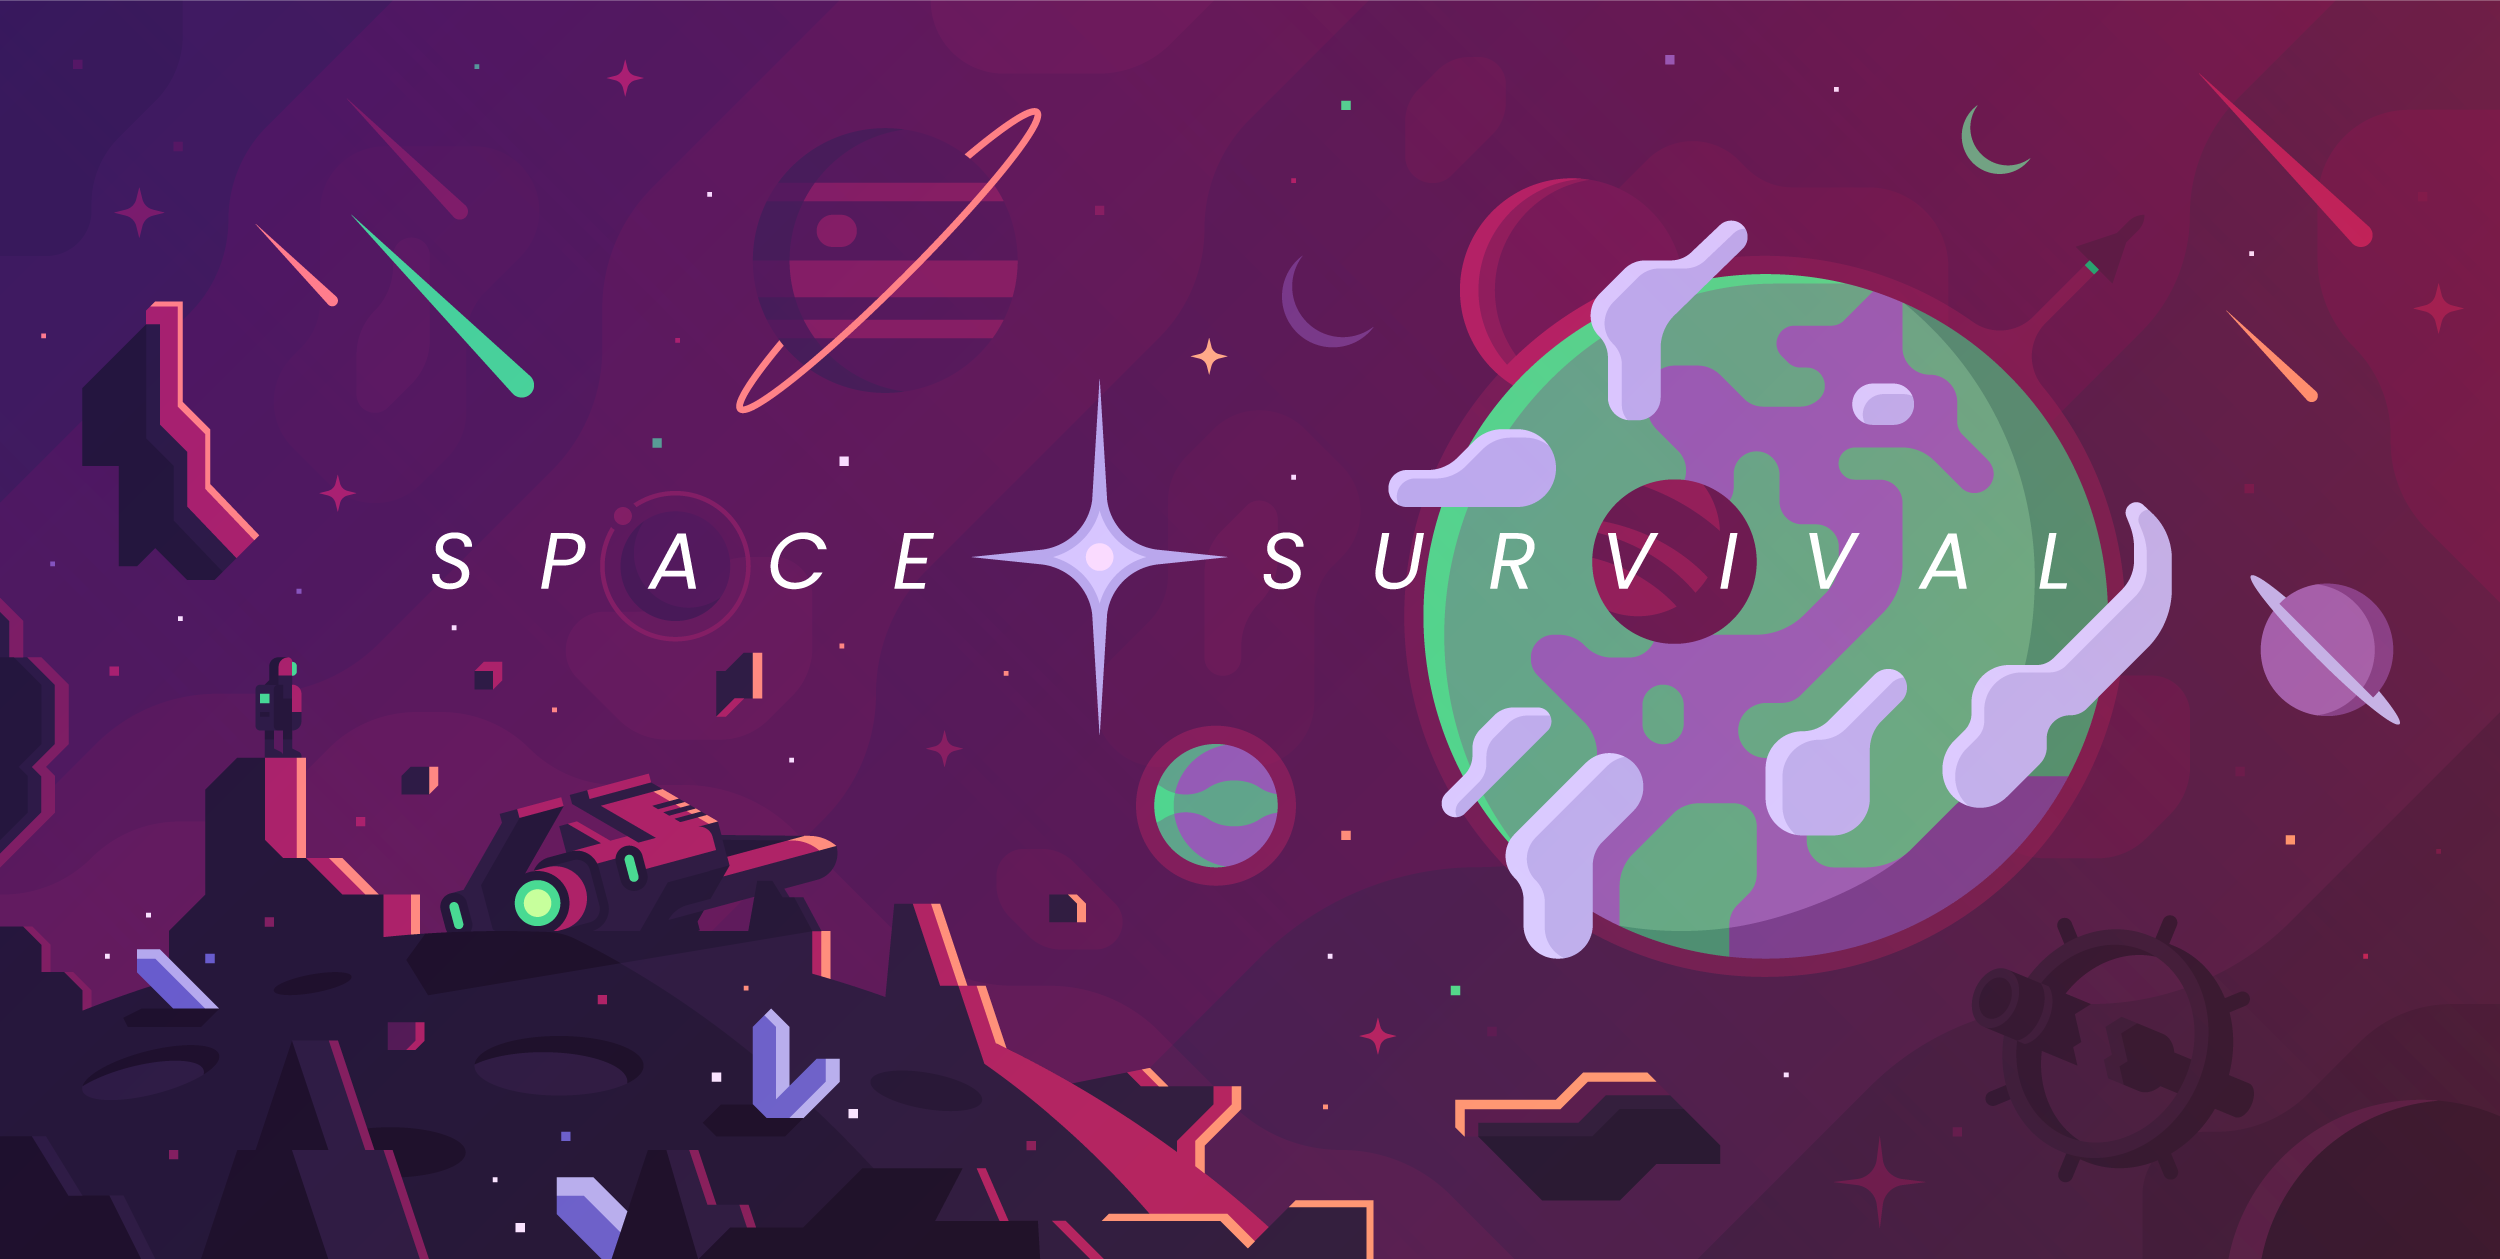 Dribbble - dots-space-survival-dribbble-canopy-_2x.png by Matt Anderson